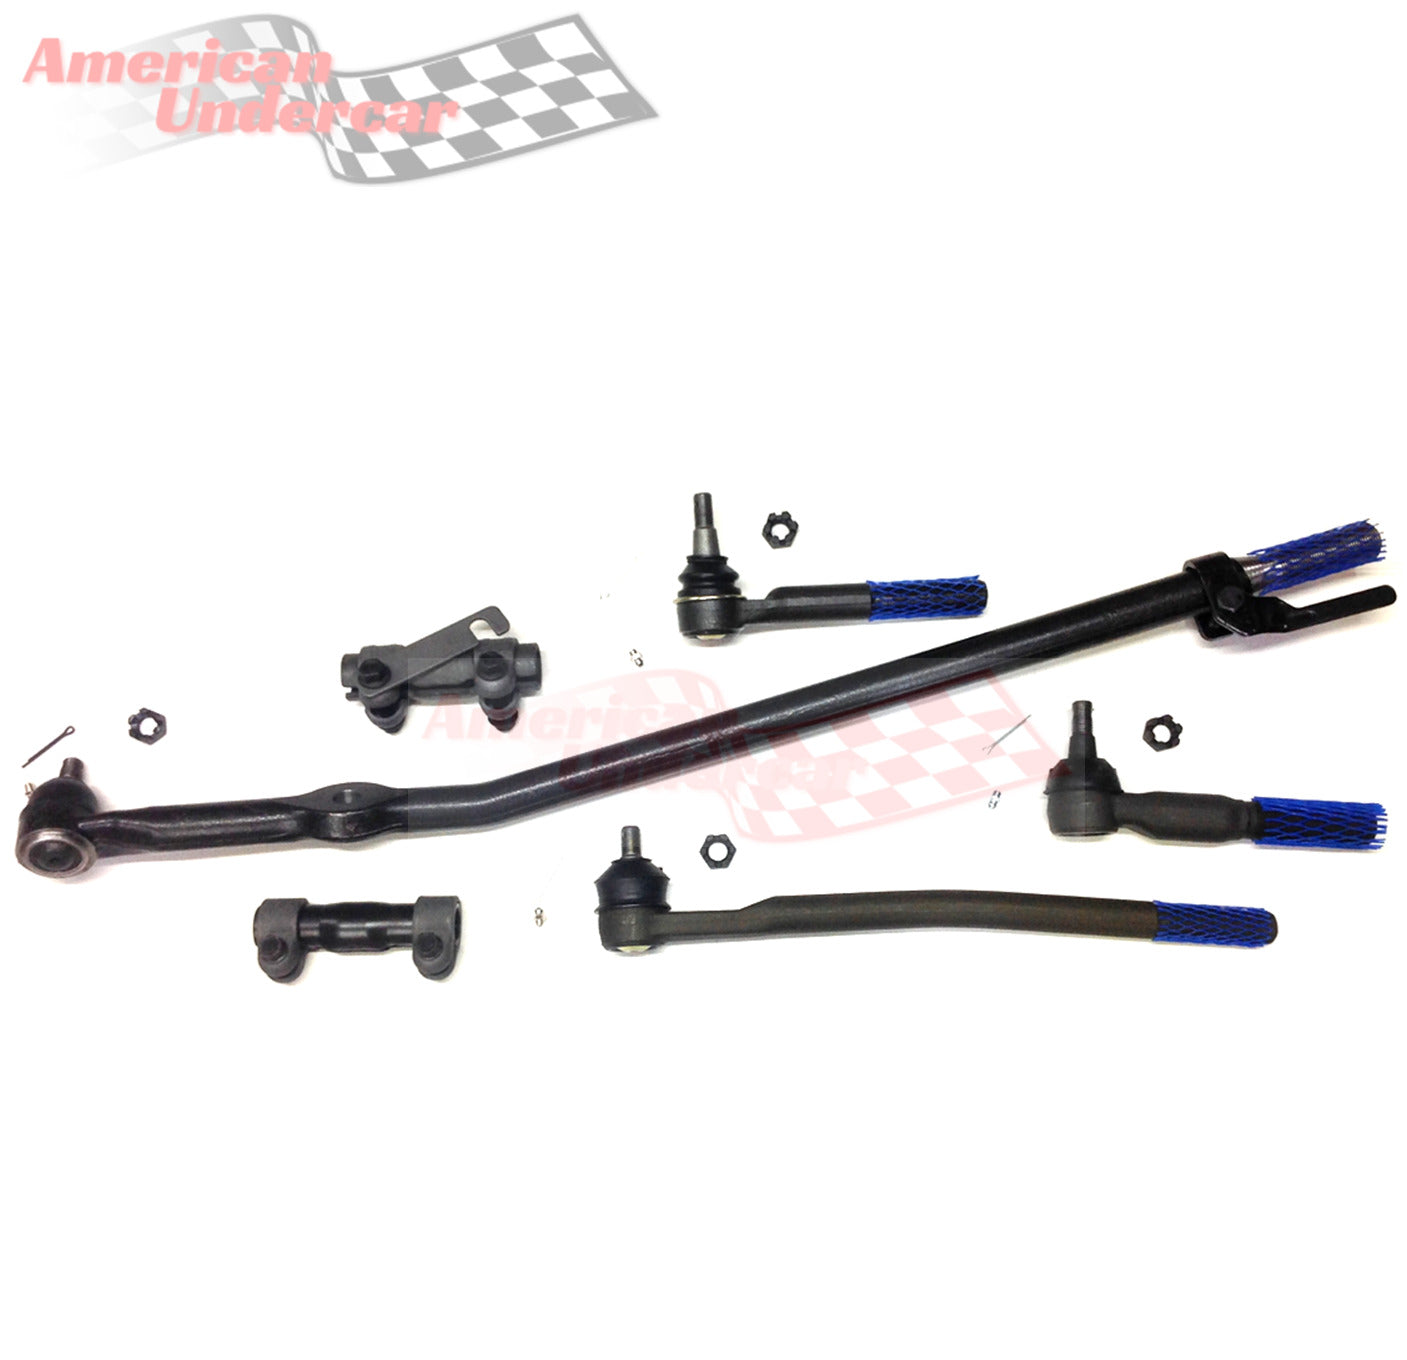 HD Super Duty Drag Link Tie Rod Sleeve Steering Kit for 1999-2004 Ford F350 Super Duty 2WD